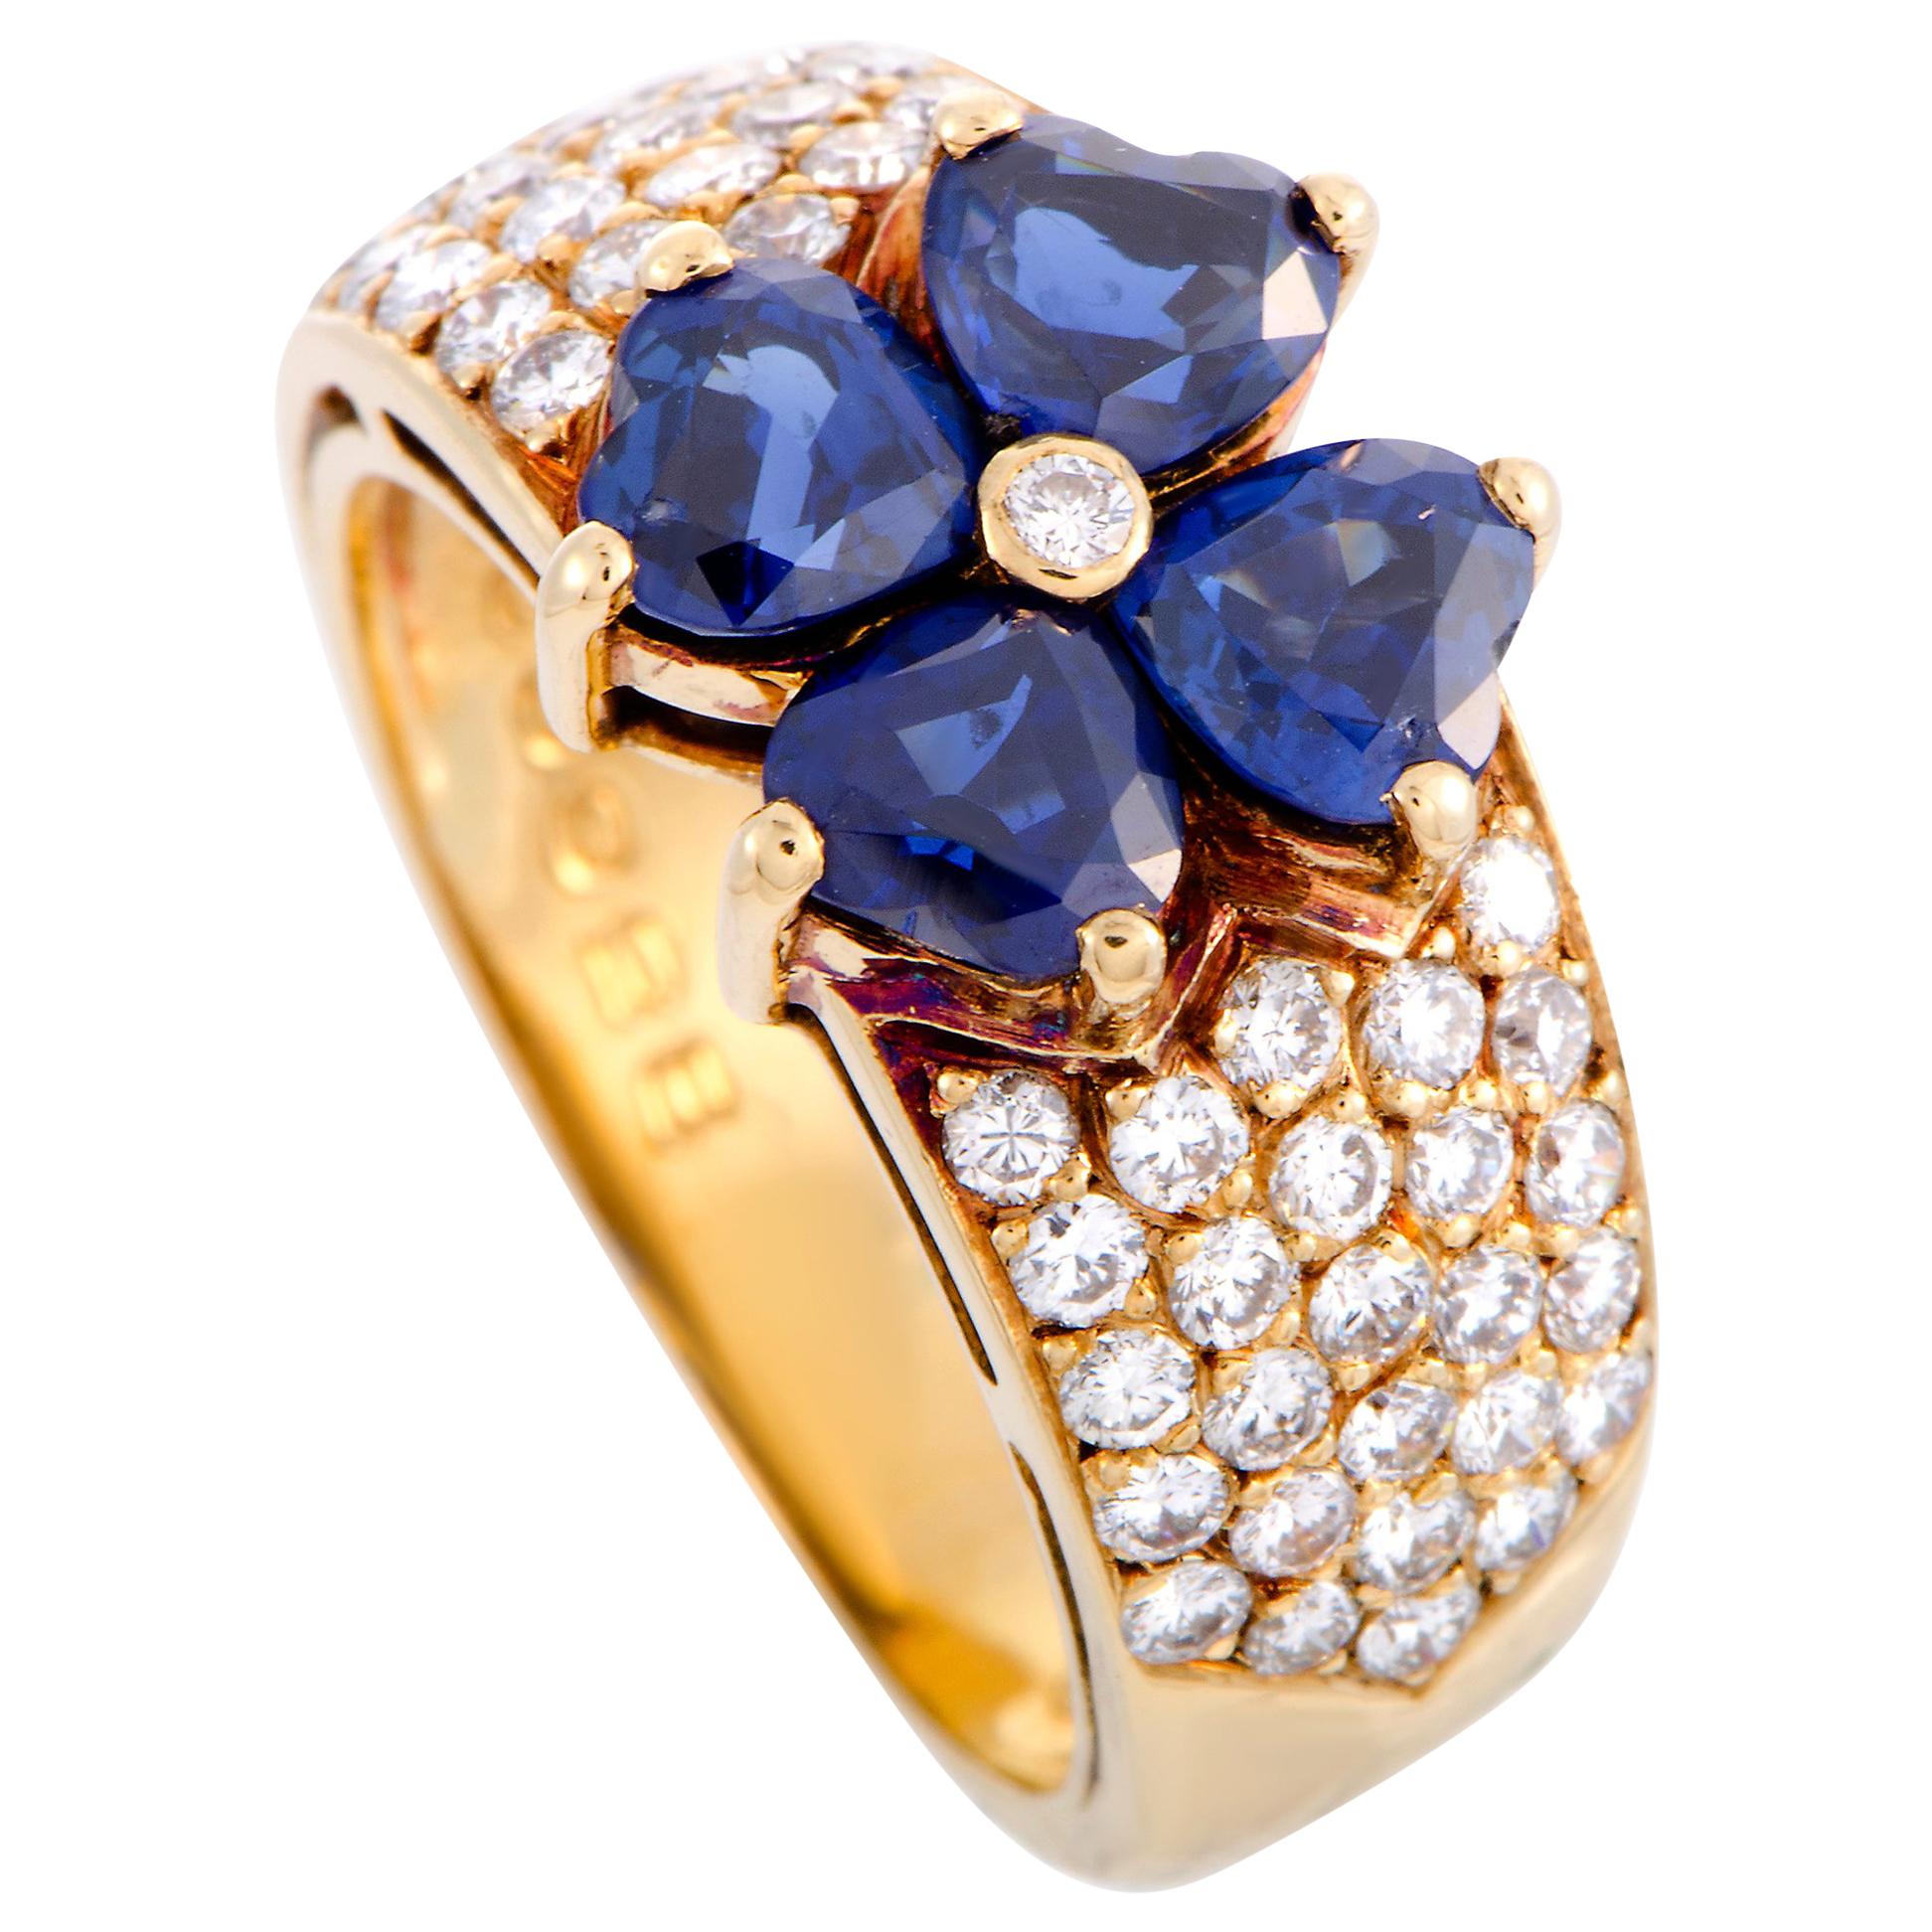 Van Cleef & Arpels Diamond and Sapphire Yellow Gold Flower Ring